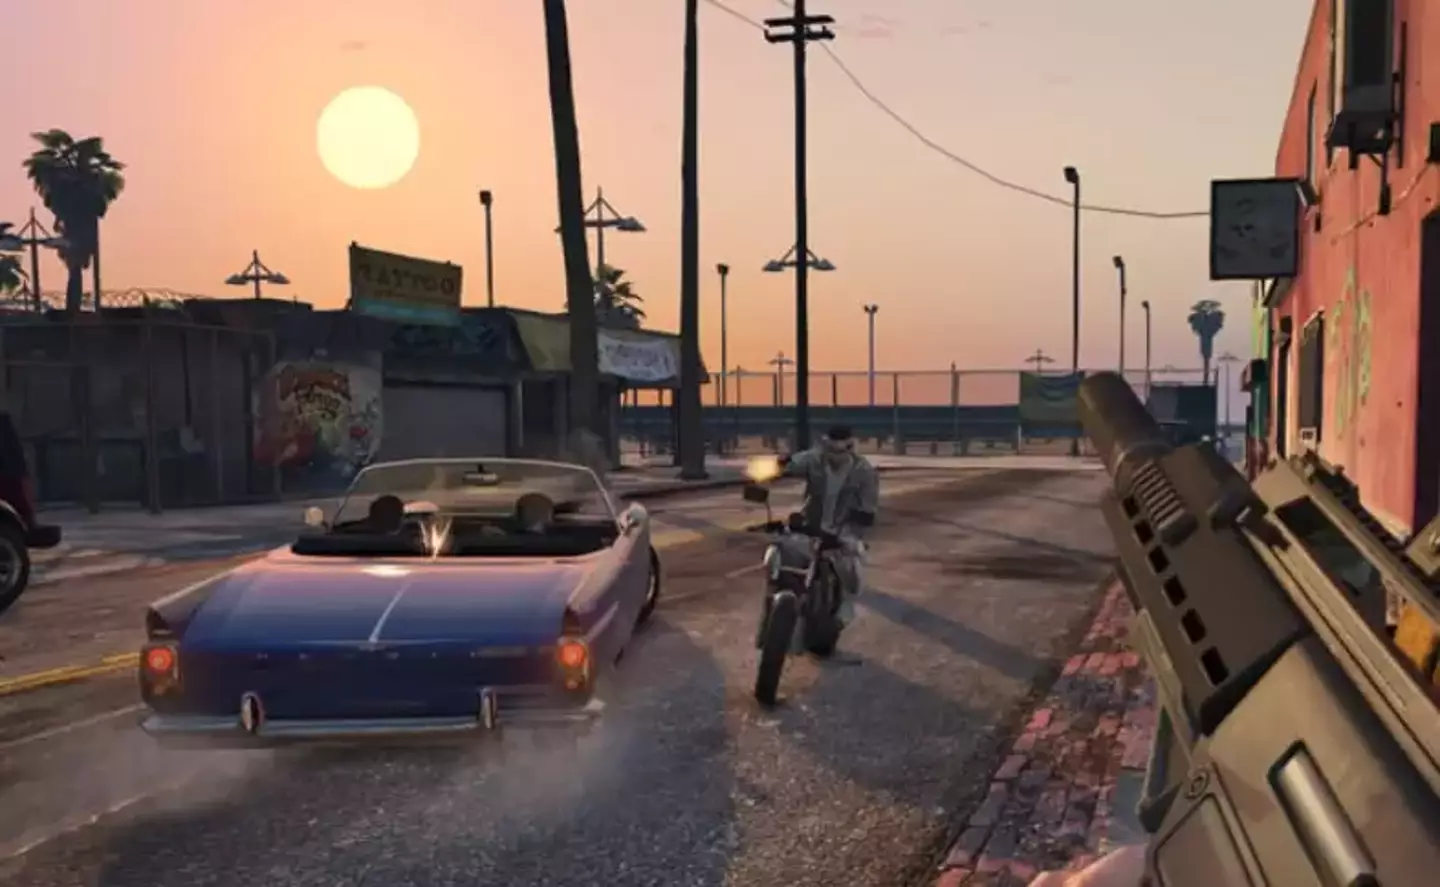 It's been nearly a decade since GTA 5 was released.